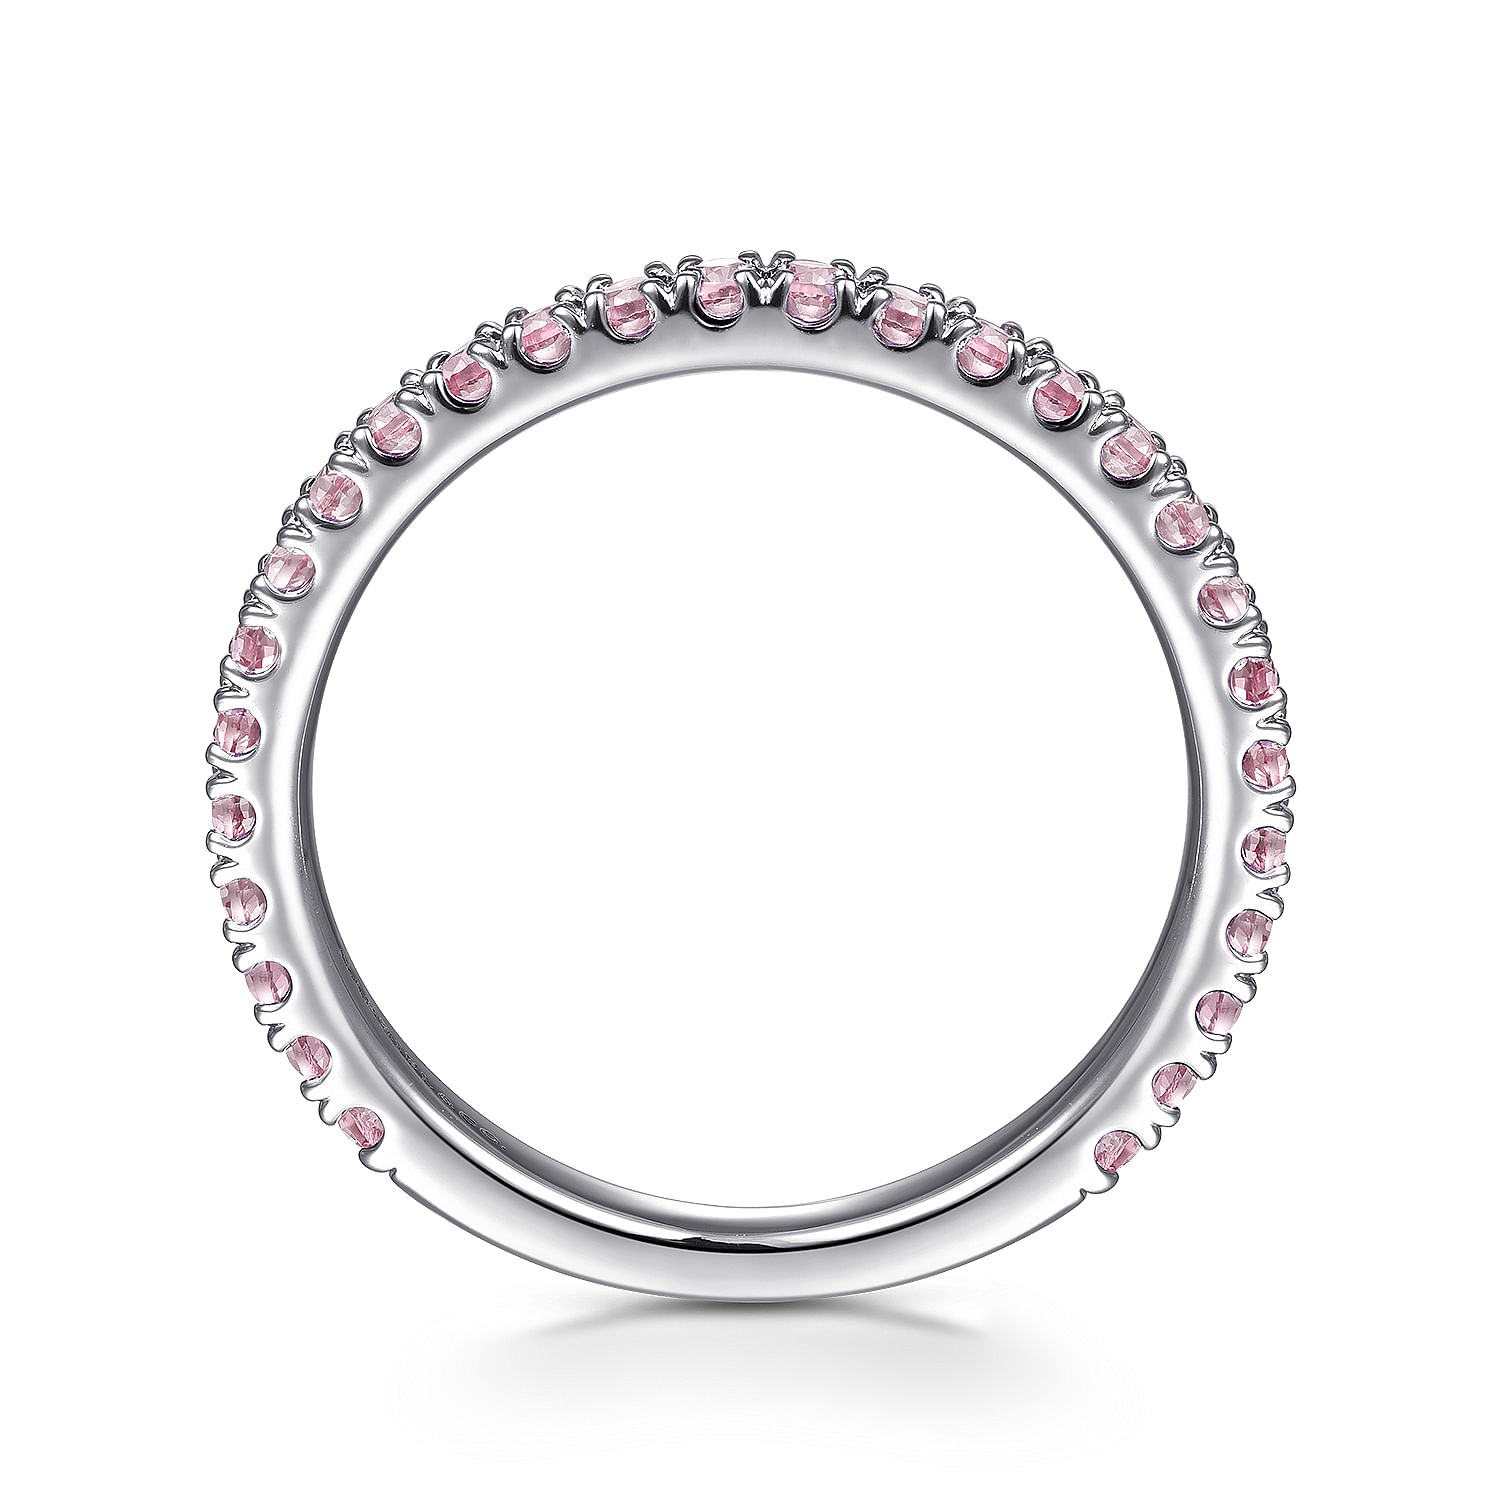 14K White Gold Pink Created Zircon Stackable Ring - Shot 2